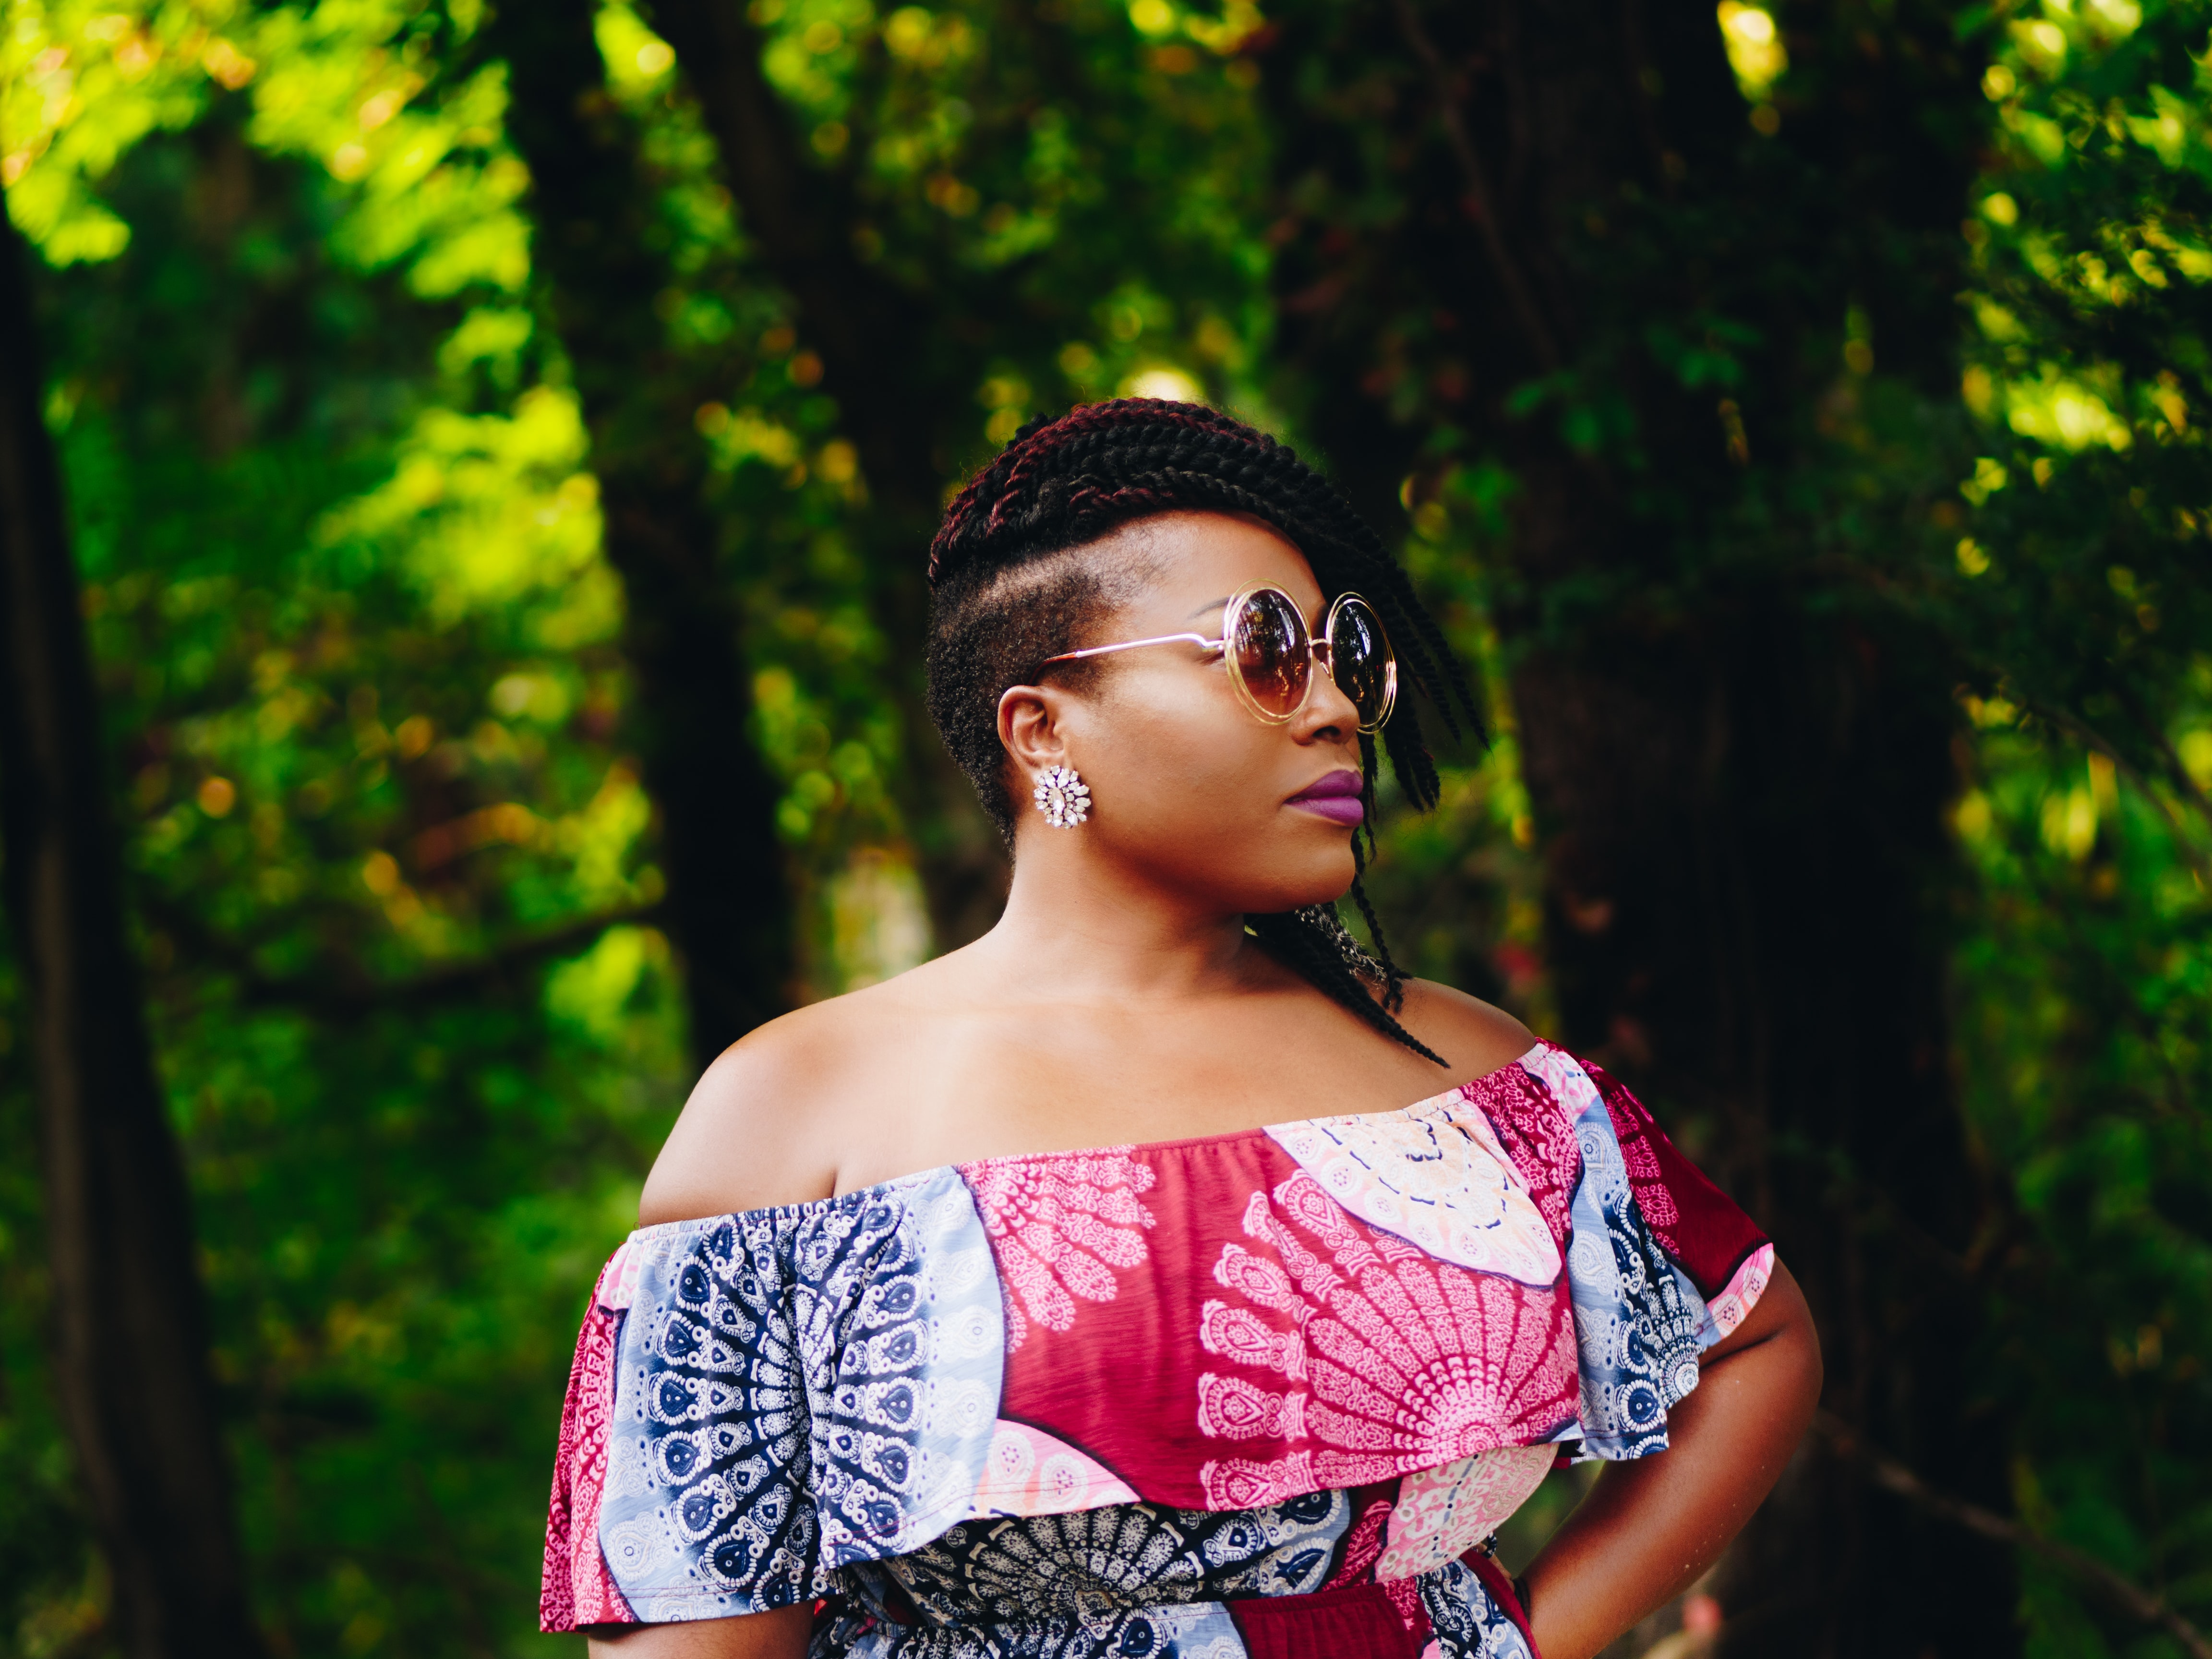 Confident black woman wearing a colorful top and sunglasses against a forested background